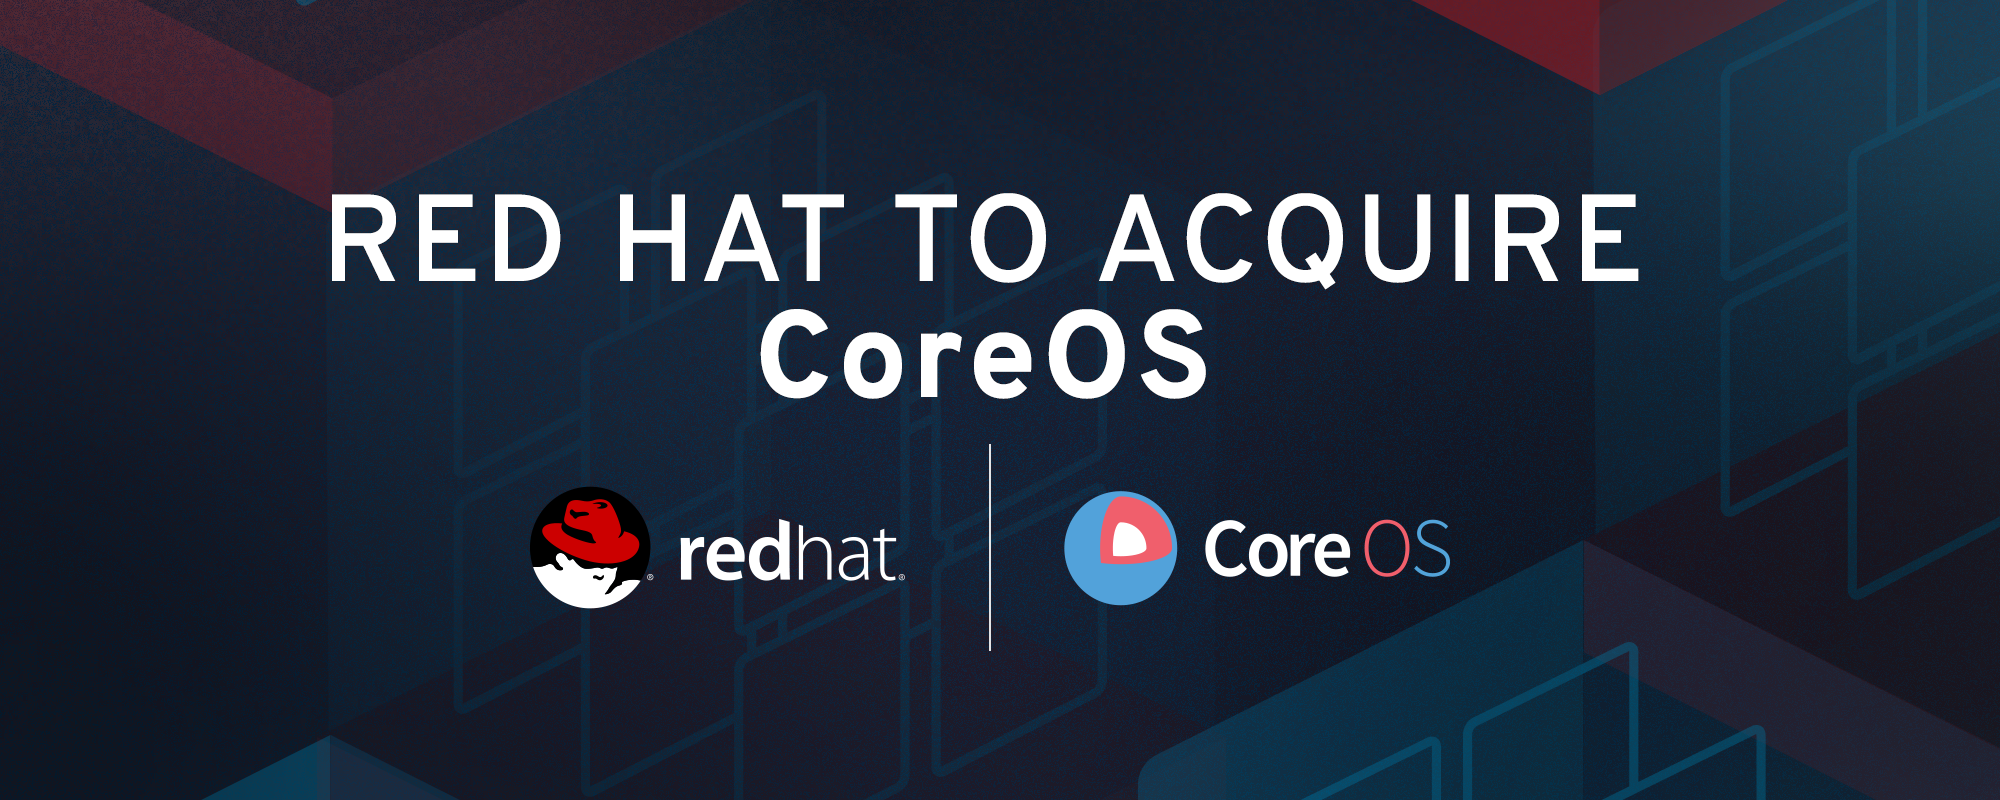 Red Hat to acquire CoreOS